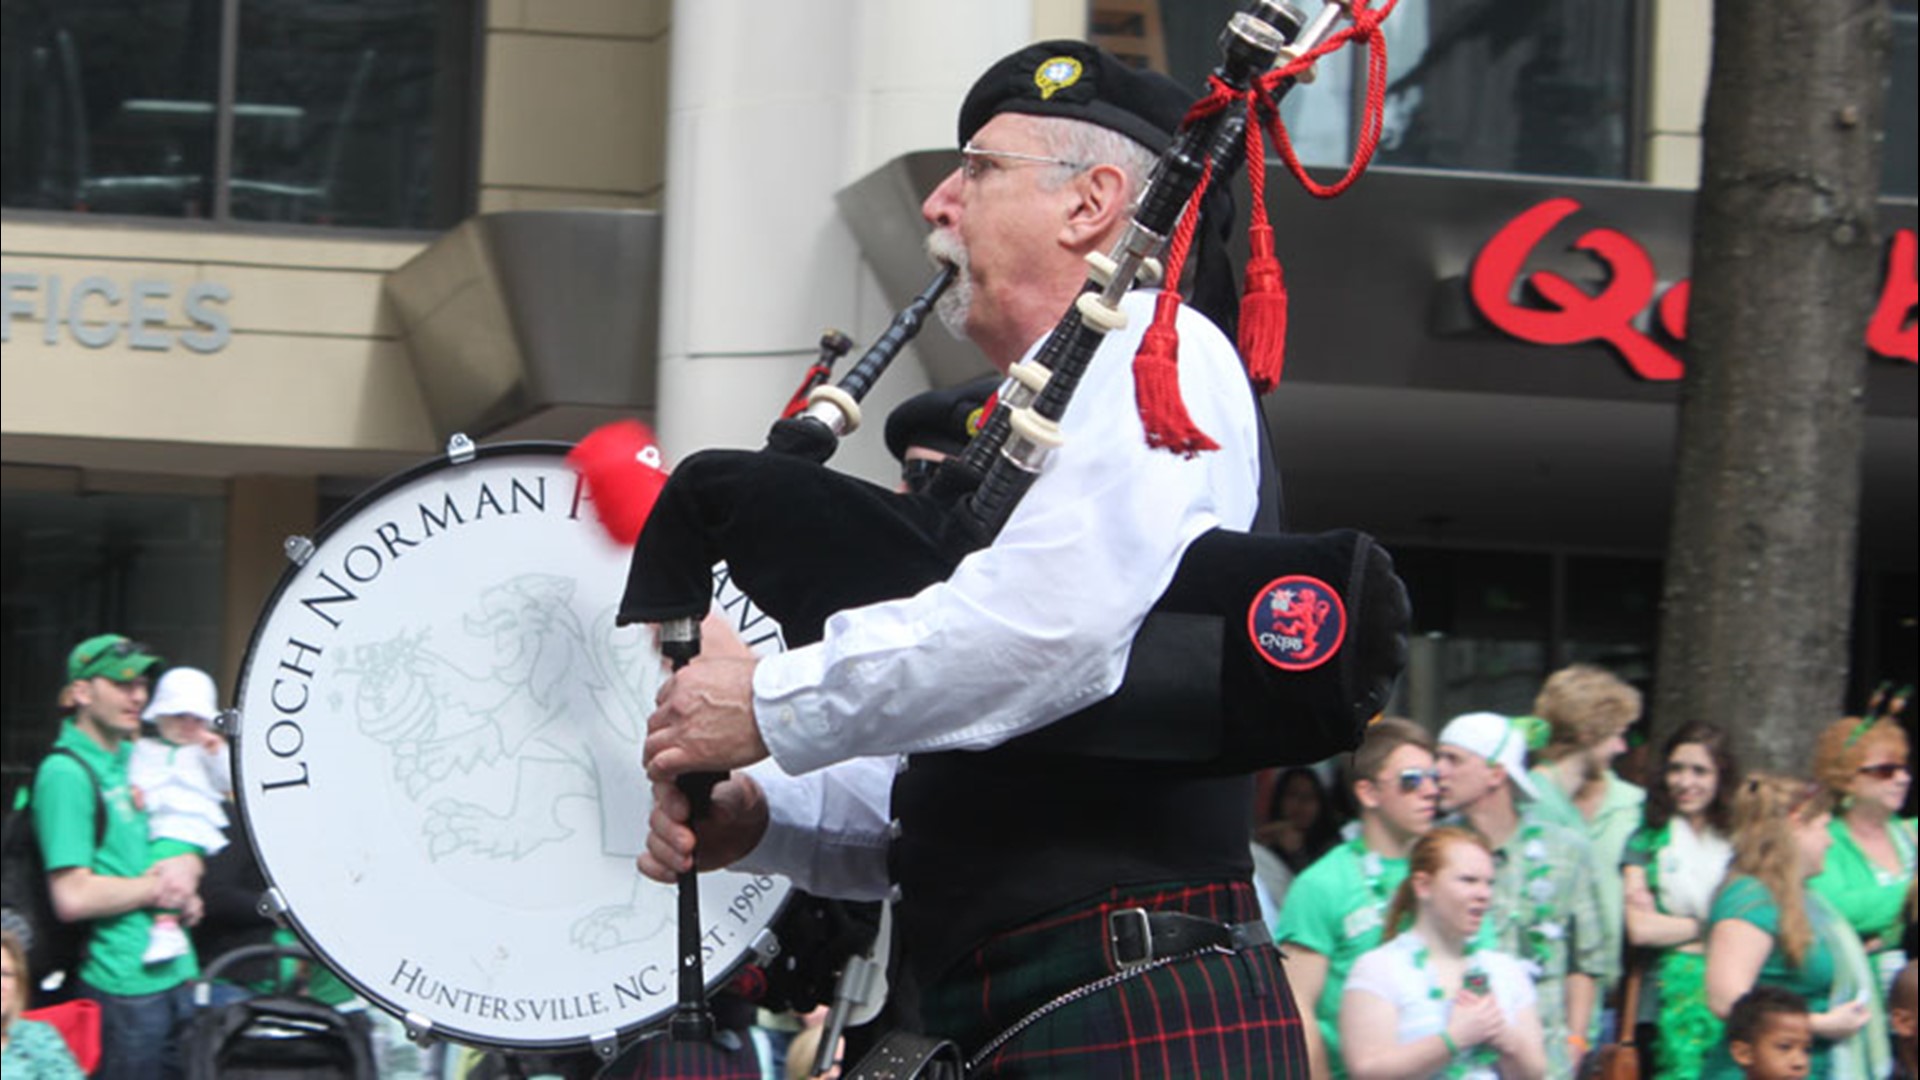 The events are being held on the Saturday before St. Patrick's Day.